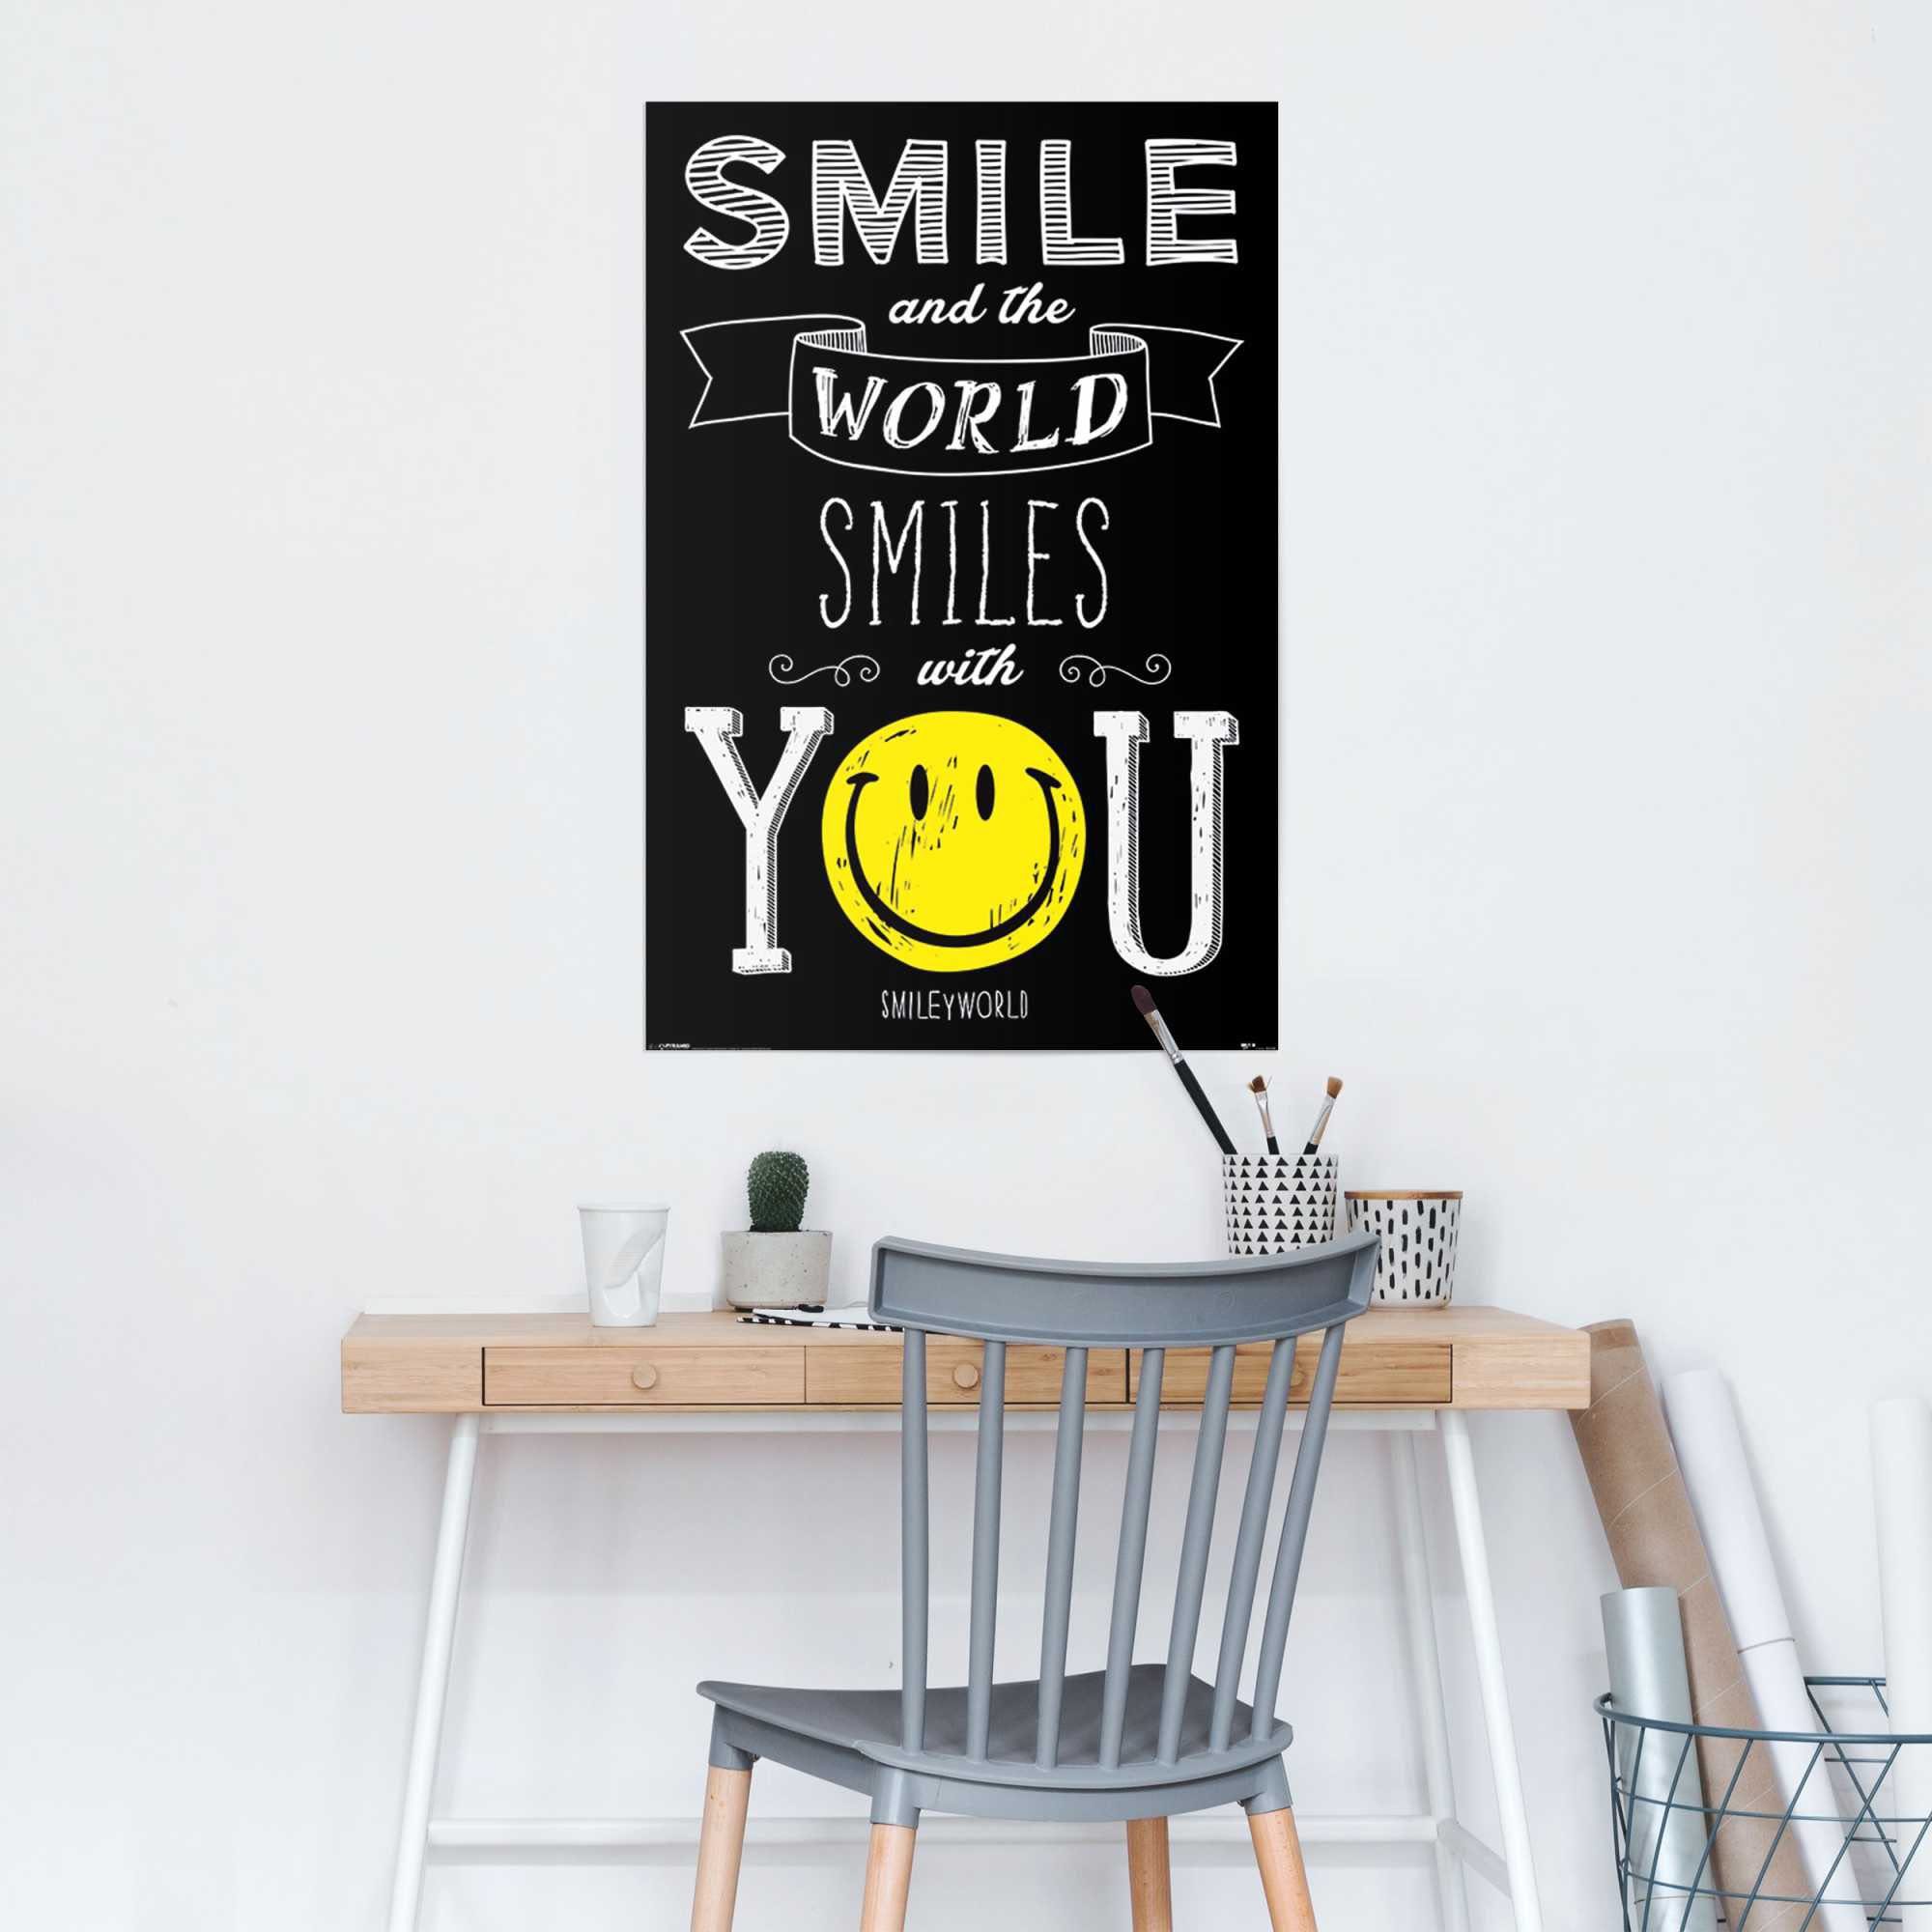 Reinders! Poster St) Smiley you, (1 with smiles world